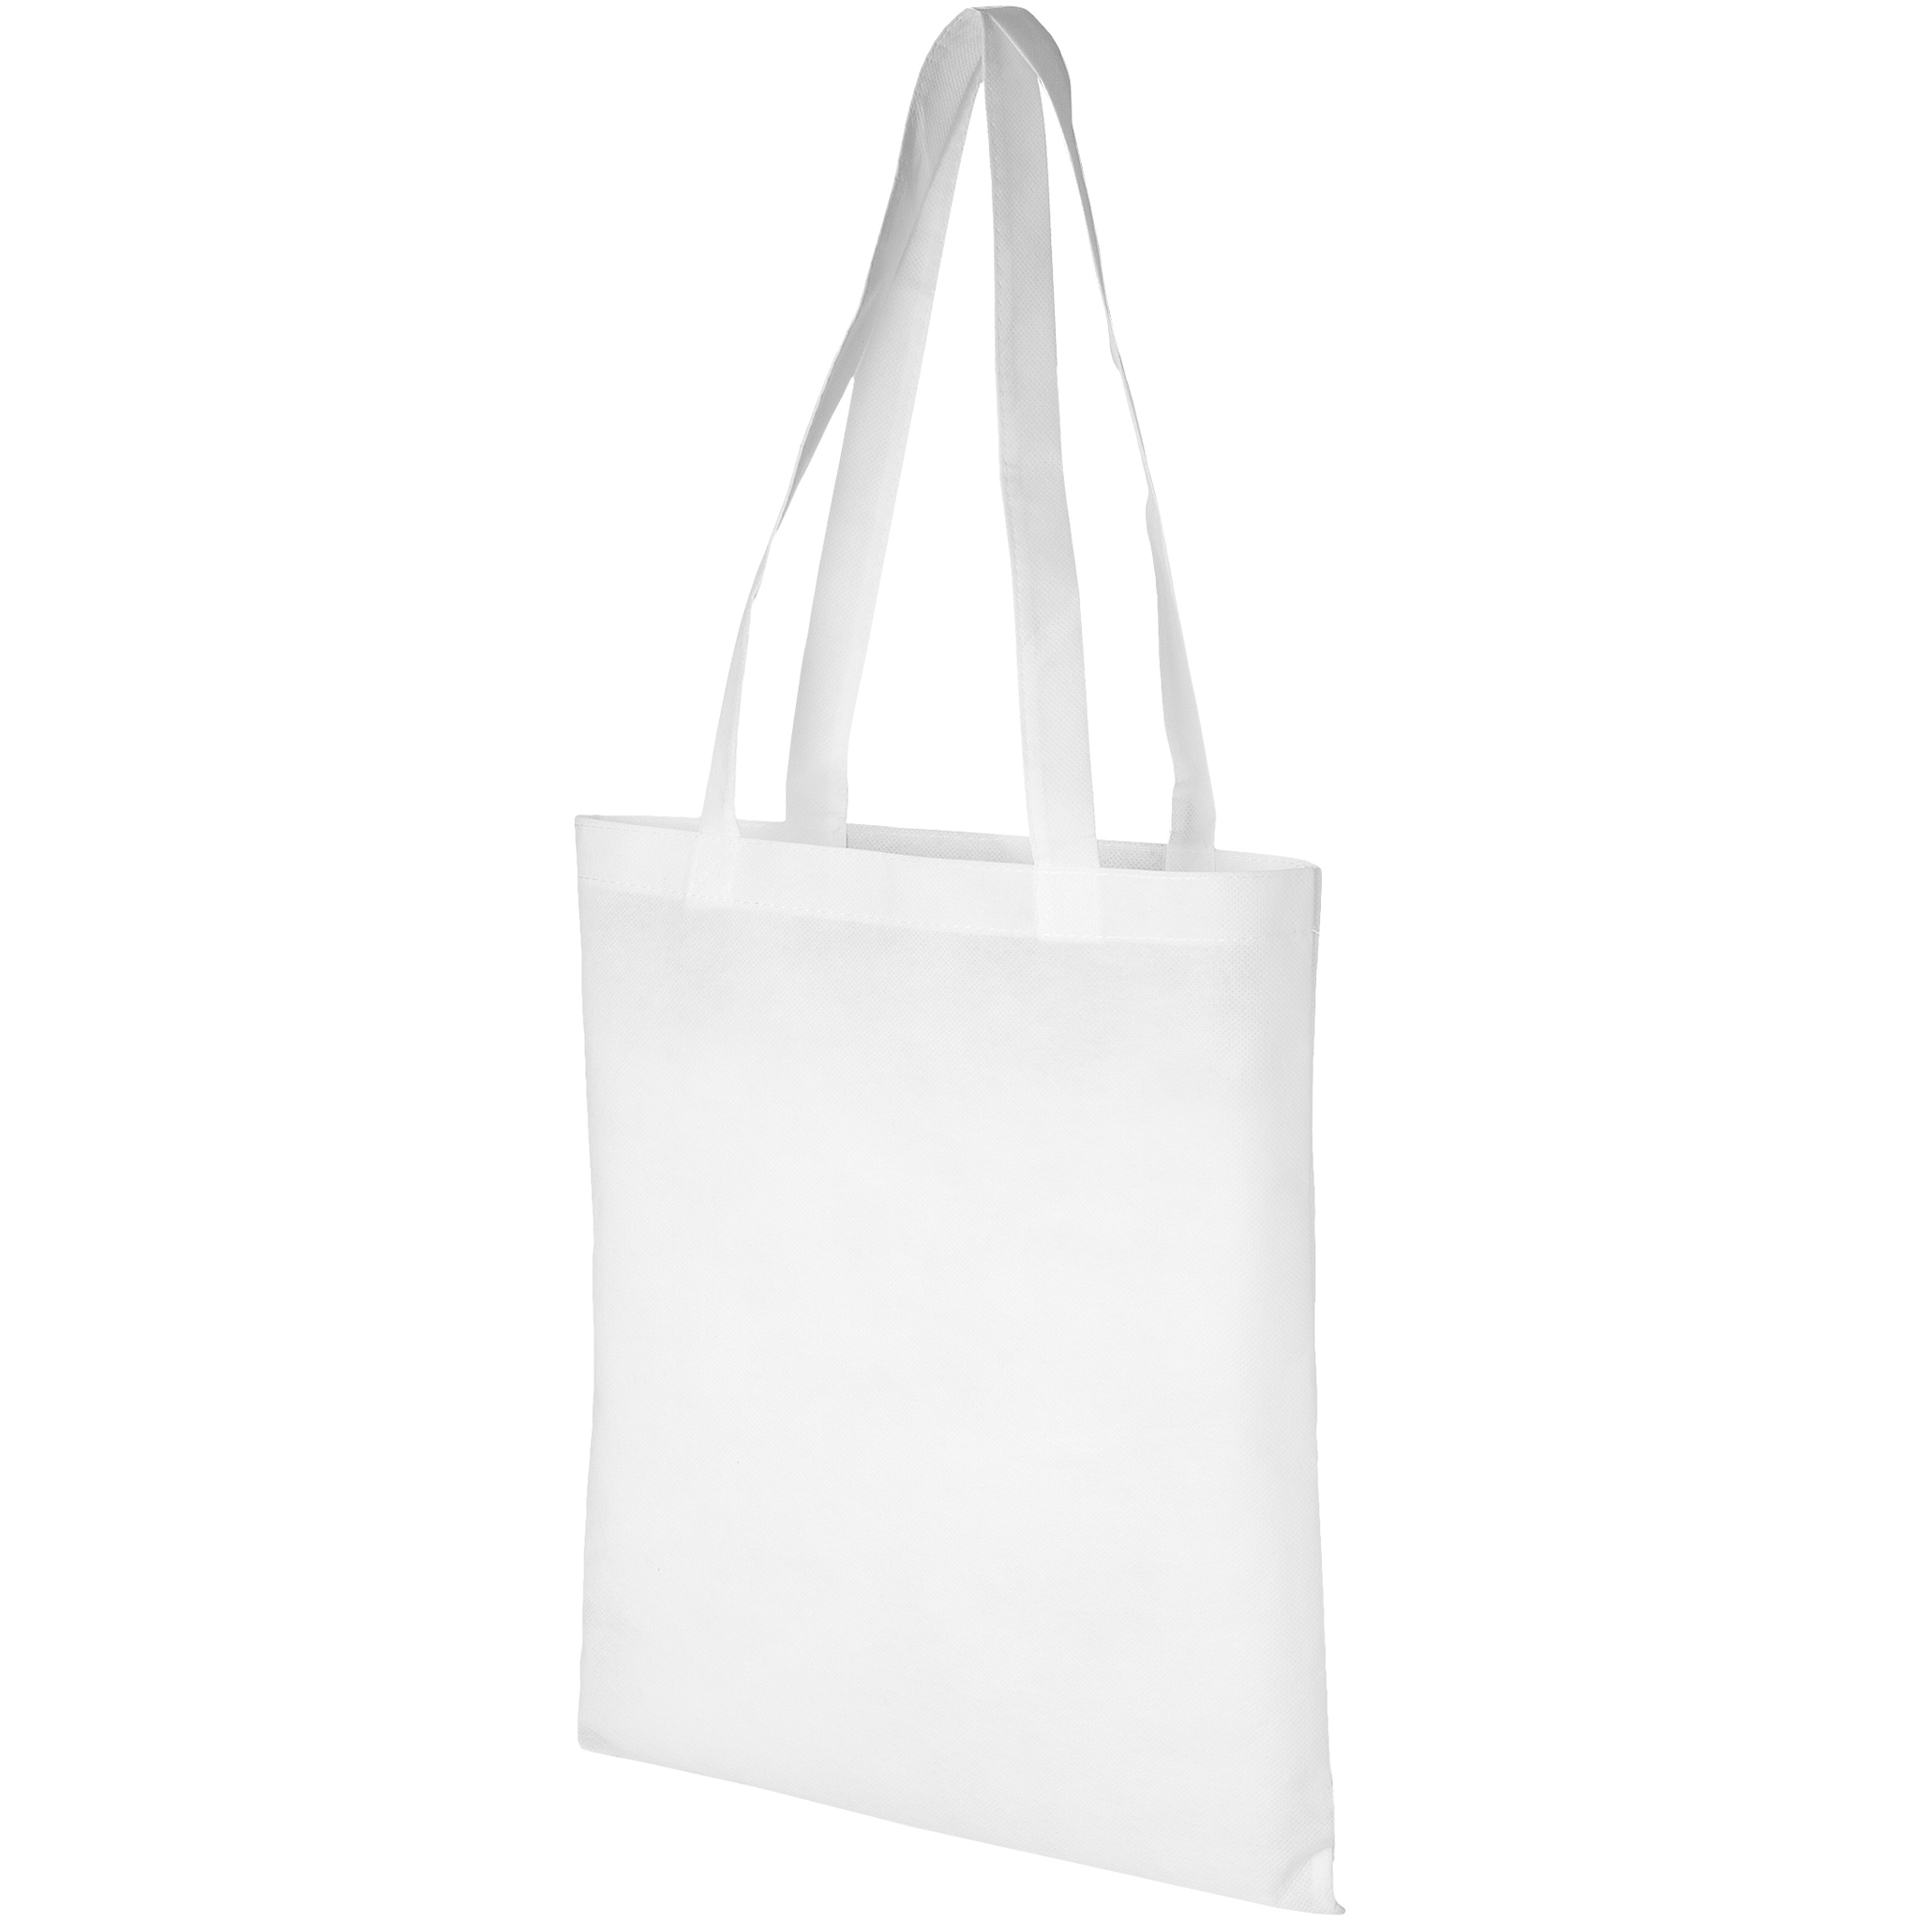 White tote bag made from non-woven material